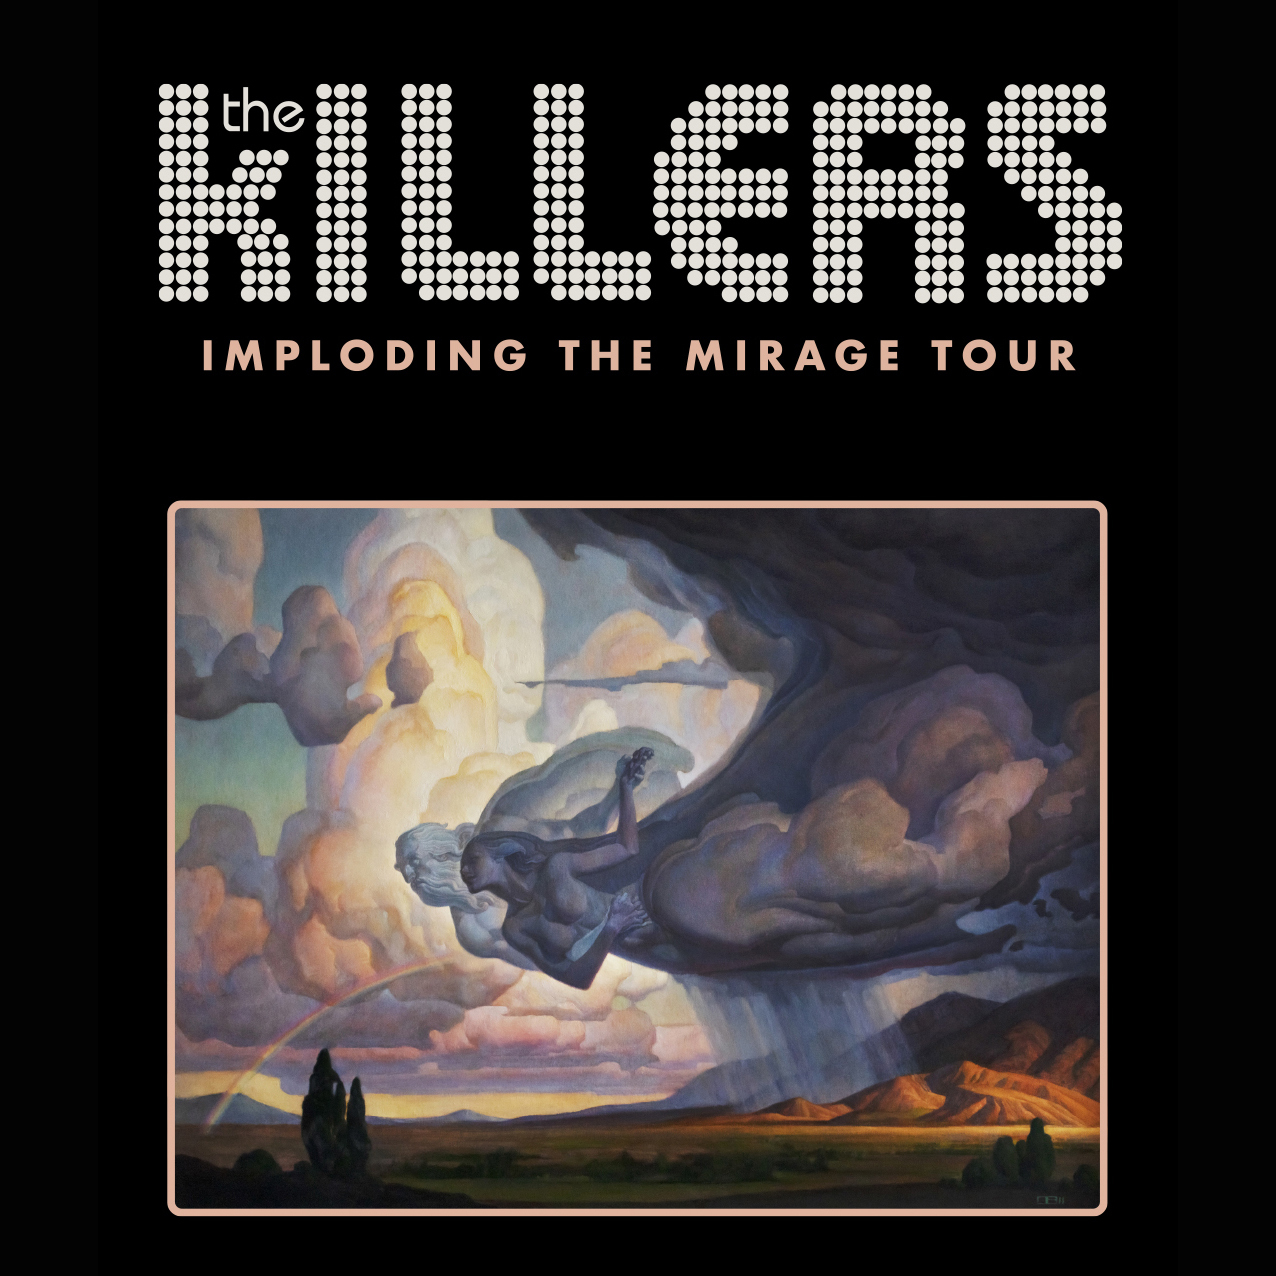 Killers - Experience Group Hospitality